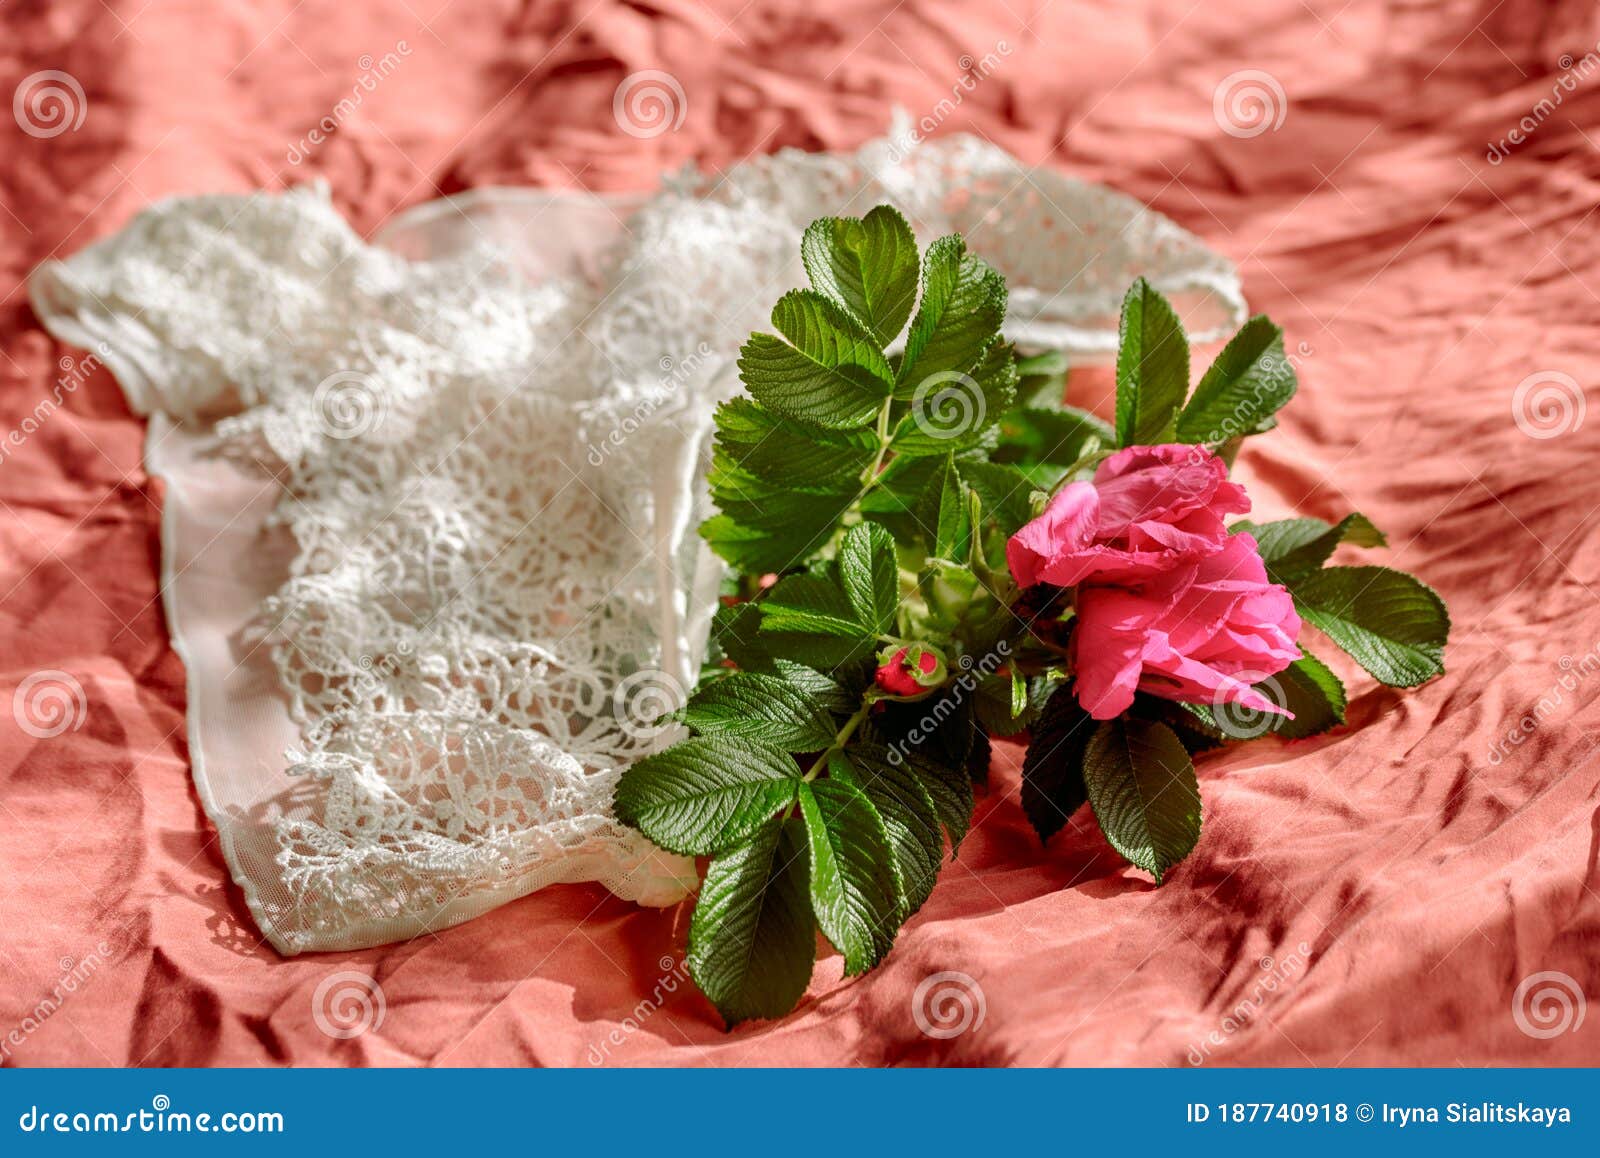 https://thumbs.dreamstime.com/z/woman-s-bra-unmade-bed-openwork-white-cotton-underpants-crumpled-blanket-red-rose-sexual-underwear-gynecological-health-187740918.jpg